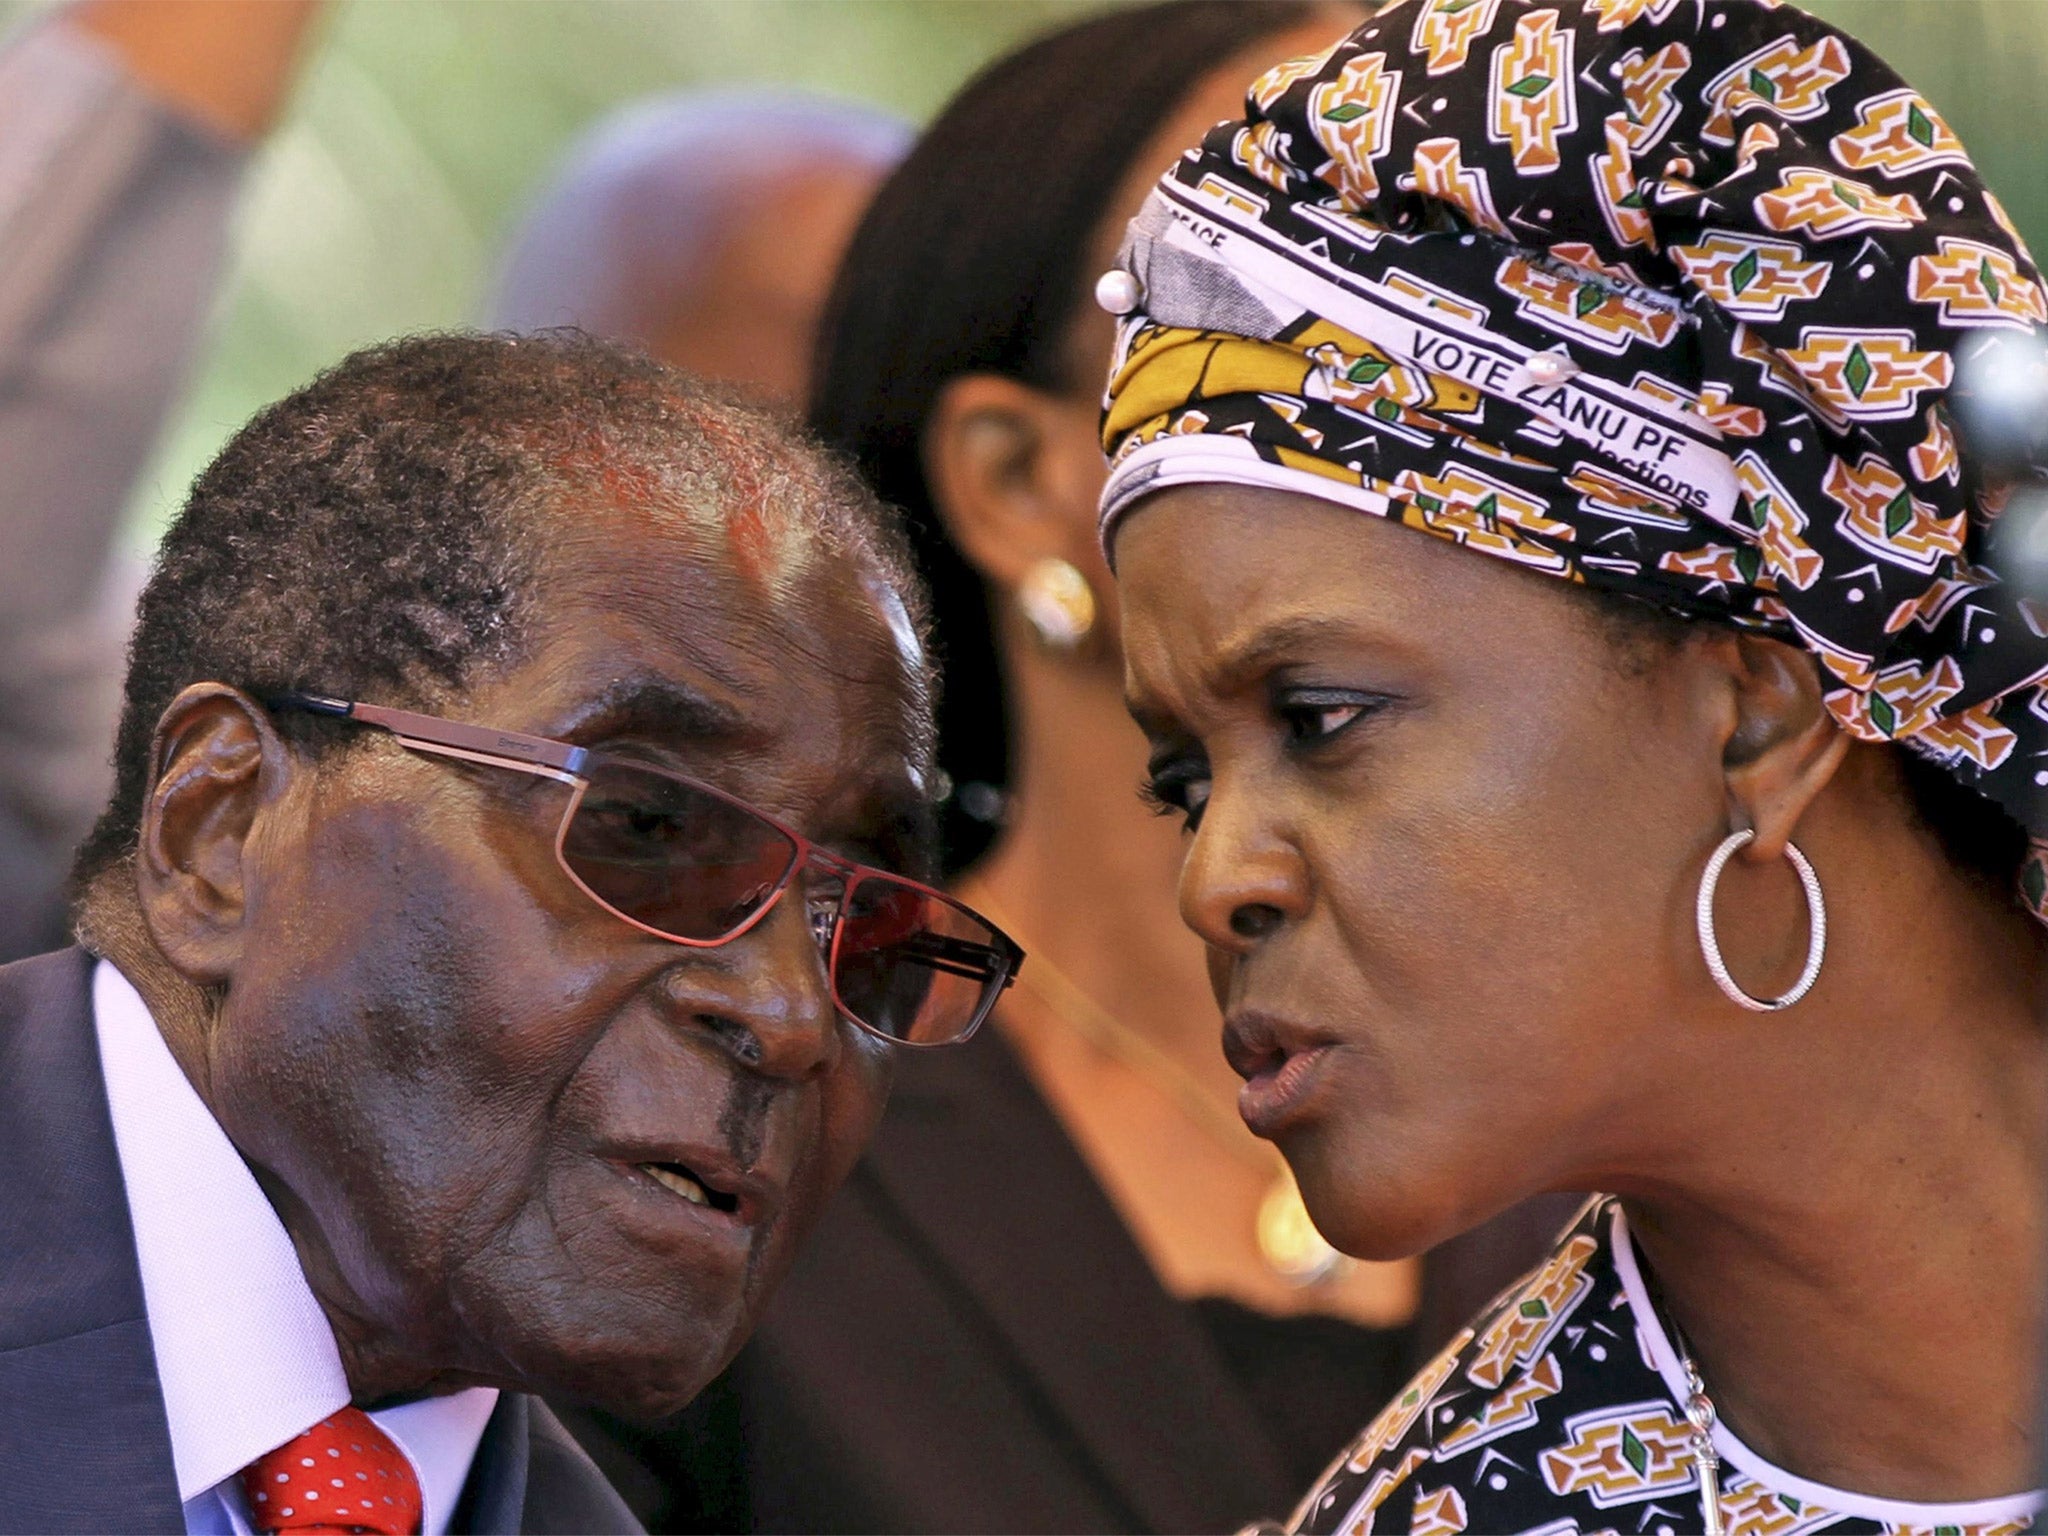 The city suffers from an oppressive government led by Robert Mugabe